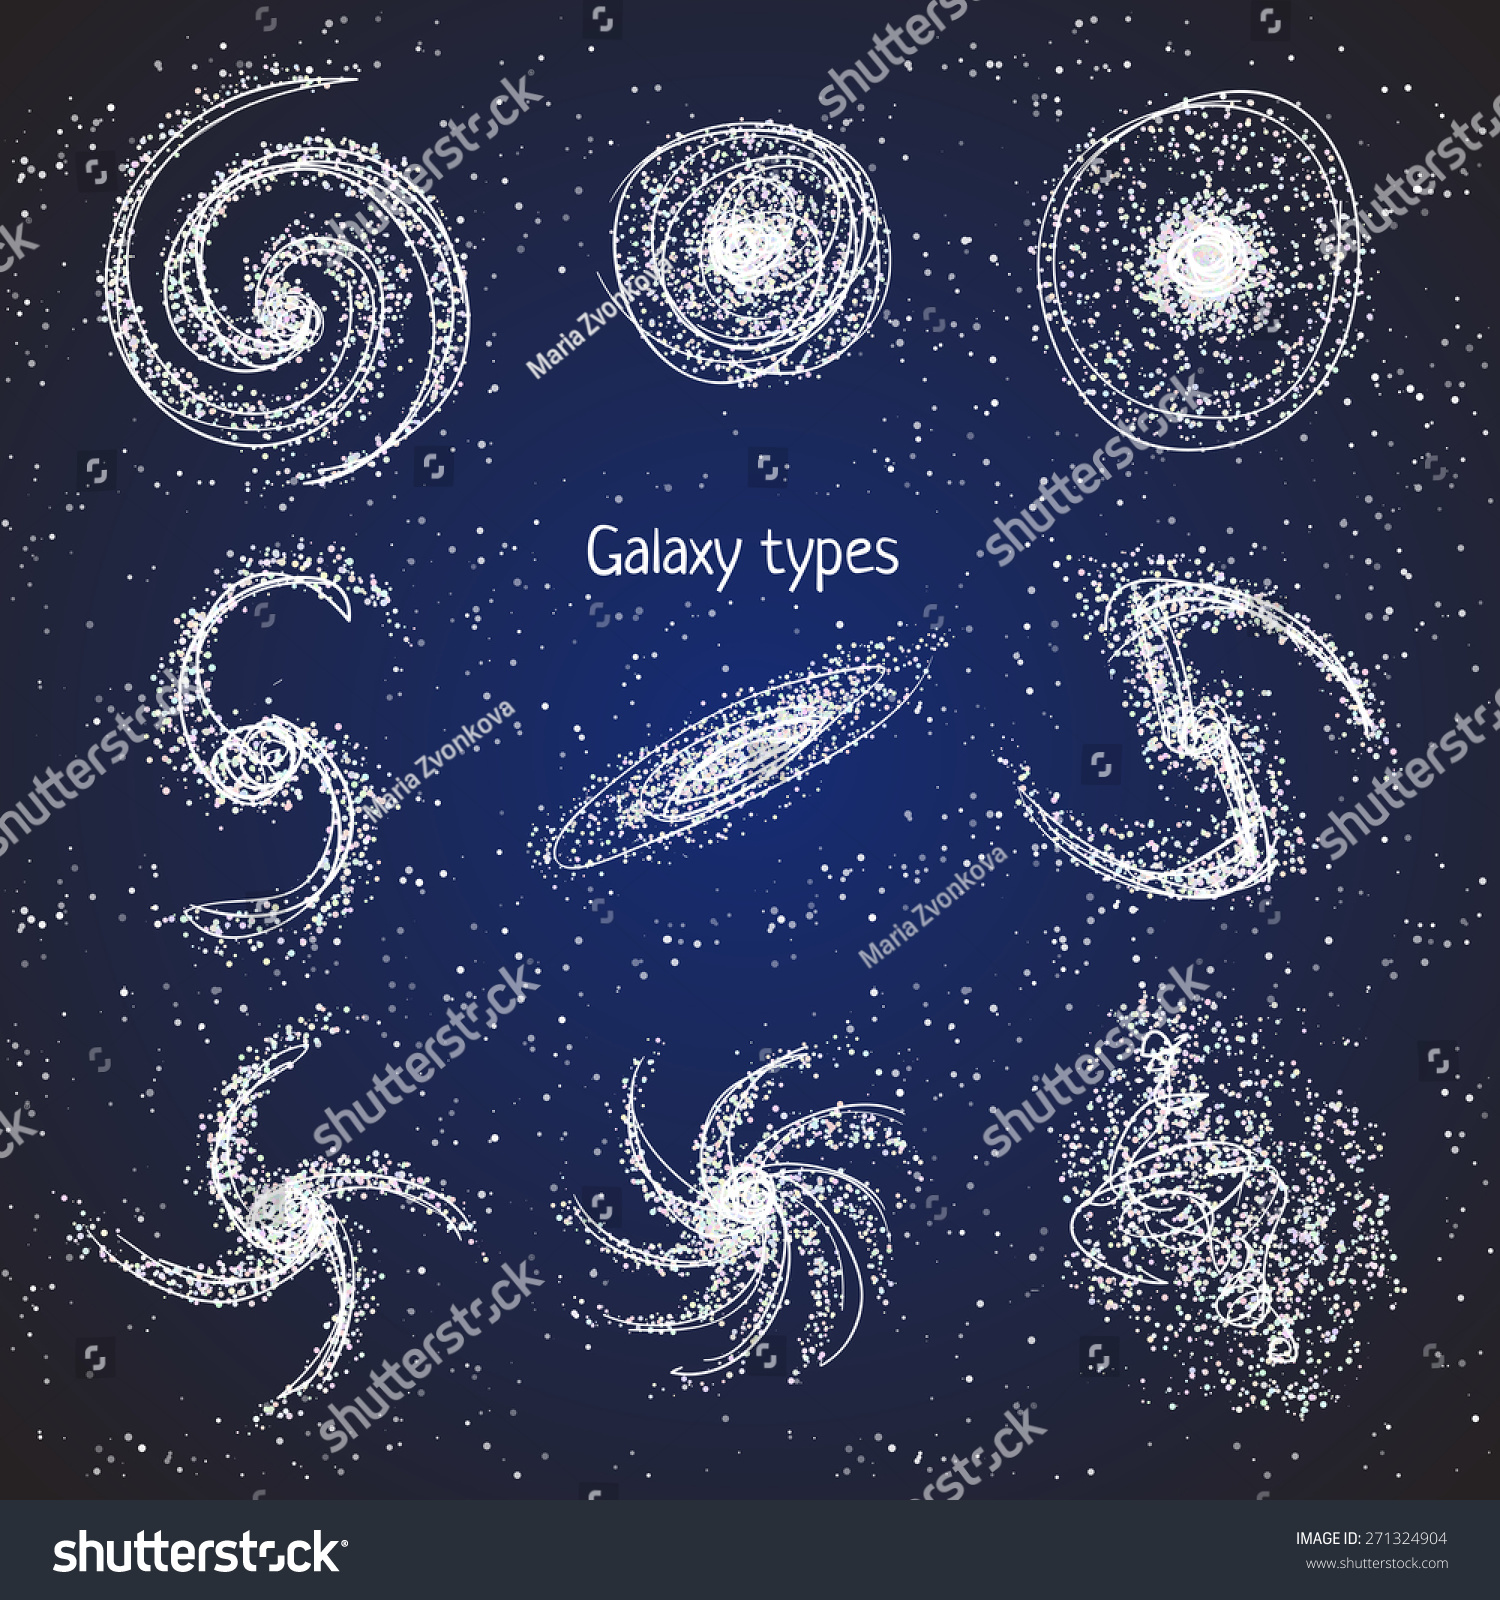 Set Of Galaxy Types. Vector Space Star Illustrations. Cosmos. Universe